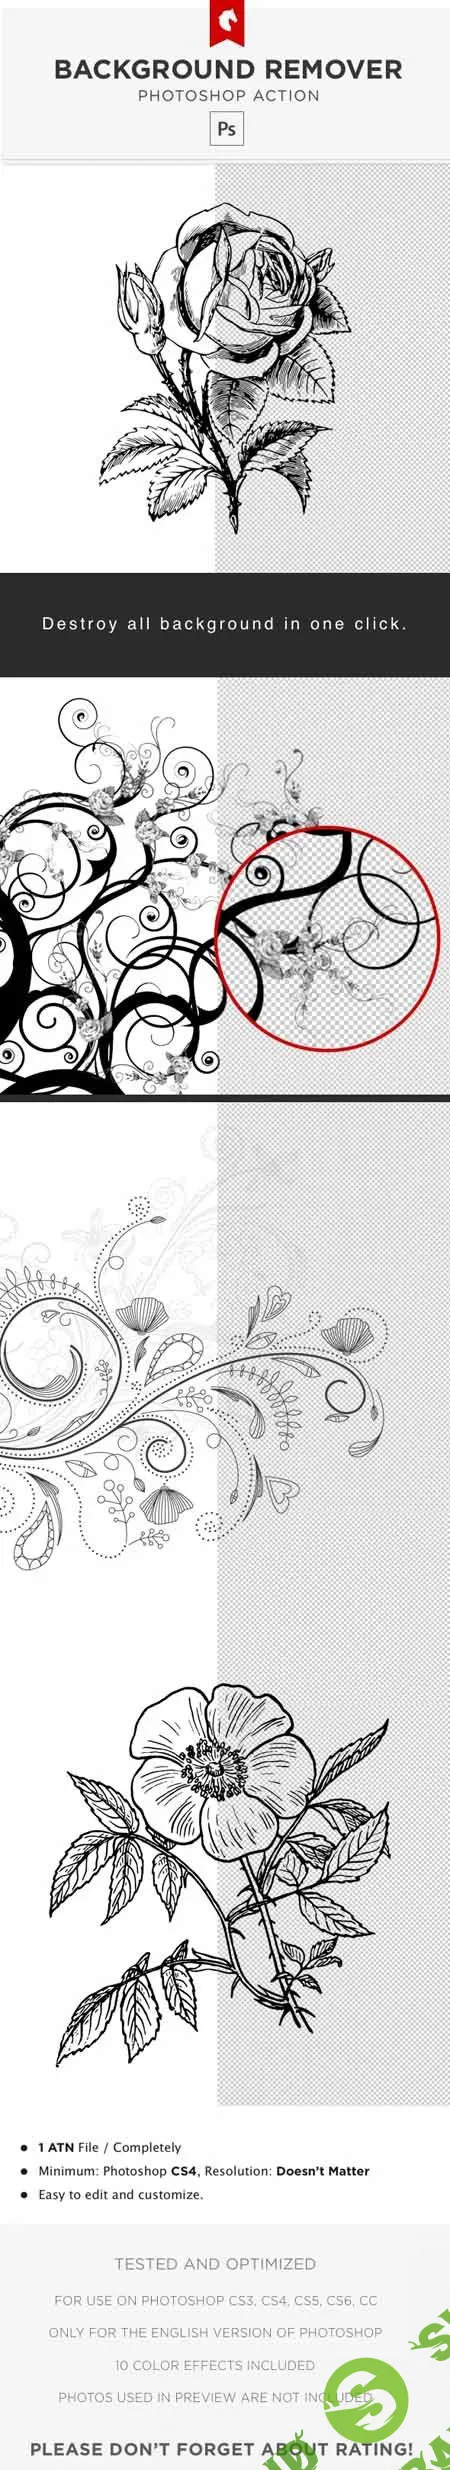 [Graphicriver] White Background Remover - Photoshop Action